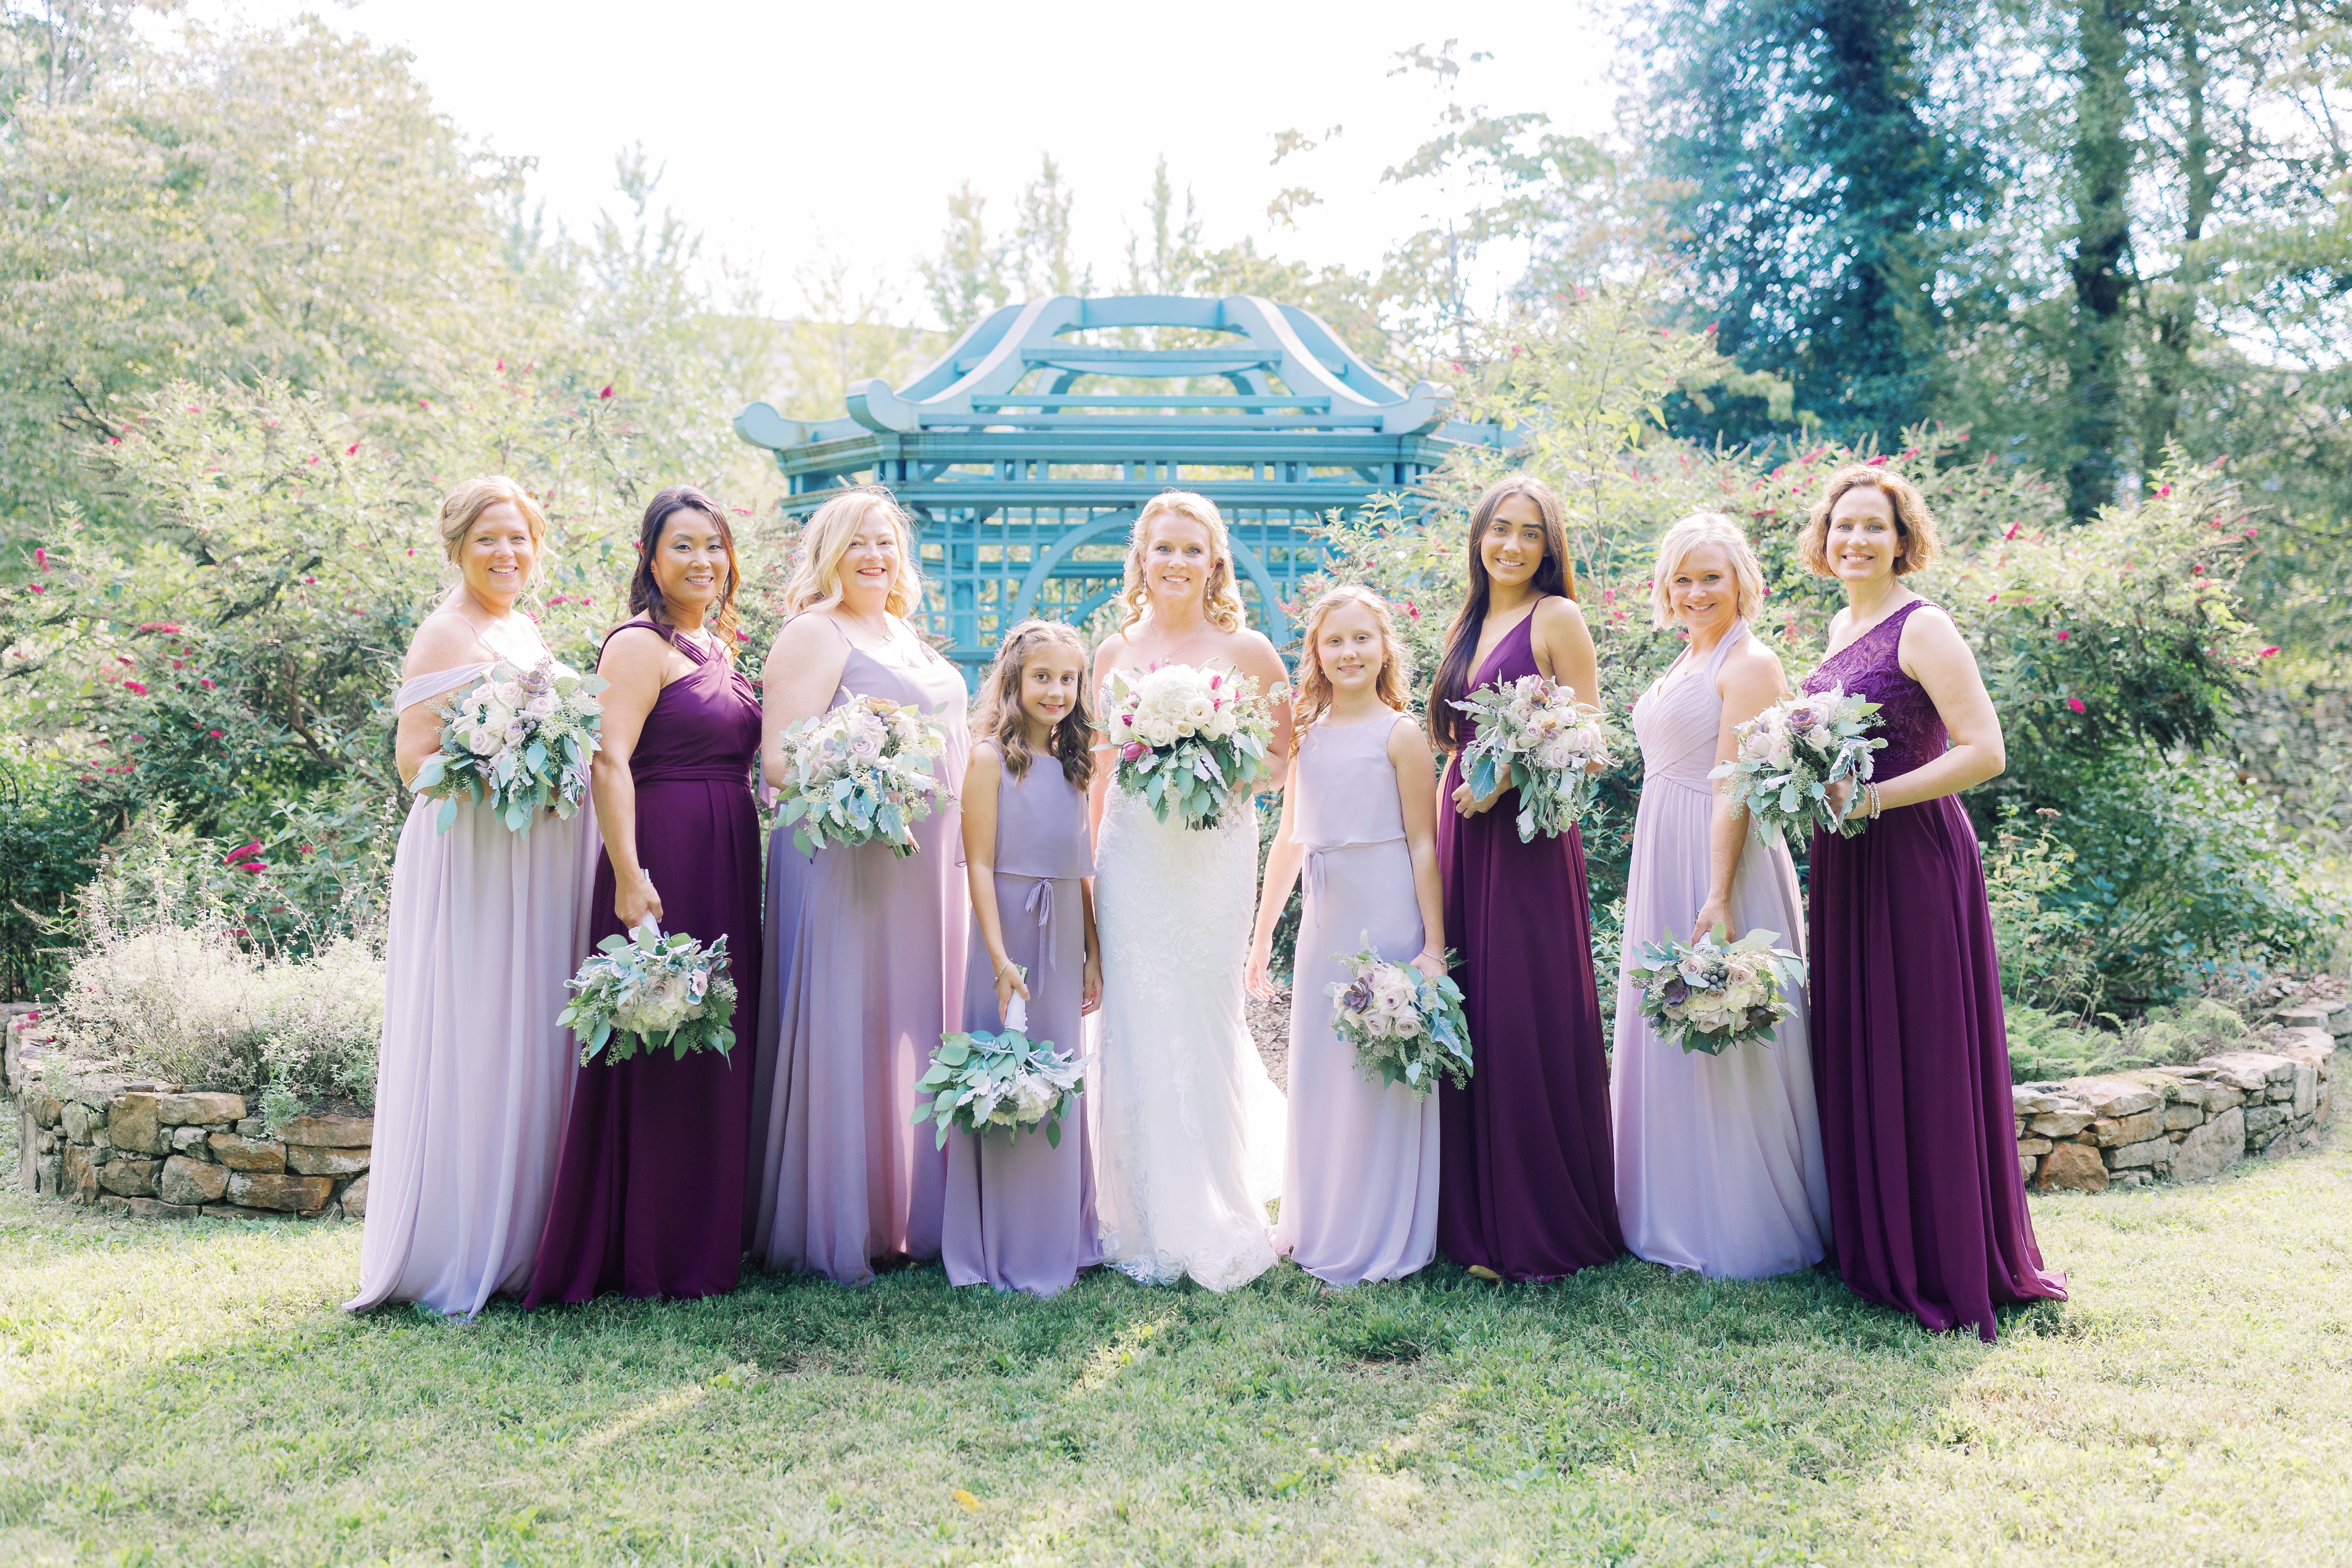 Bride and Bridal Party wearing Kennedy Blue Bridesmaid Dresses in French Lilac, Wisteria, and Eggplant.